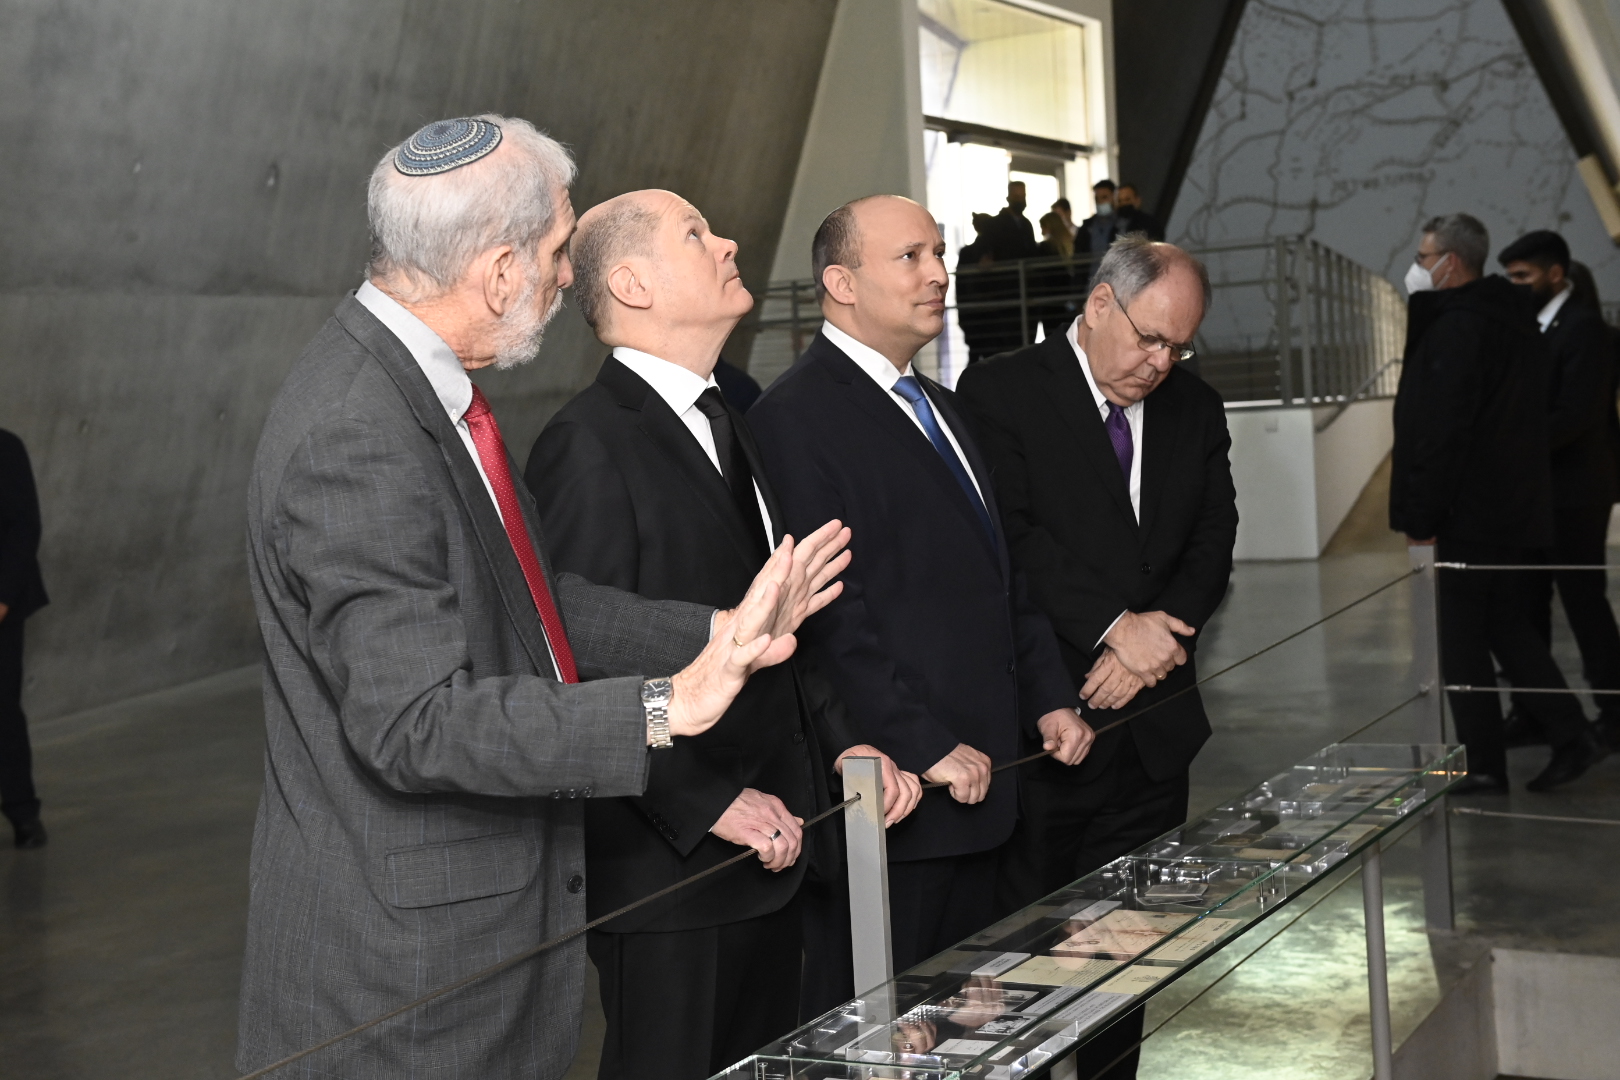 German Chancellor Olaf Scholz tours Yad Vashem's Holocaust History Museum together with Yad Vashem Chairman Dani Dayan and Israel's Prime Minister Naftali Bennett